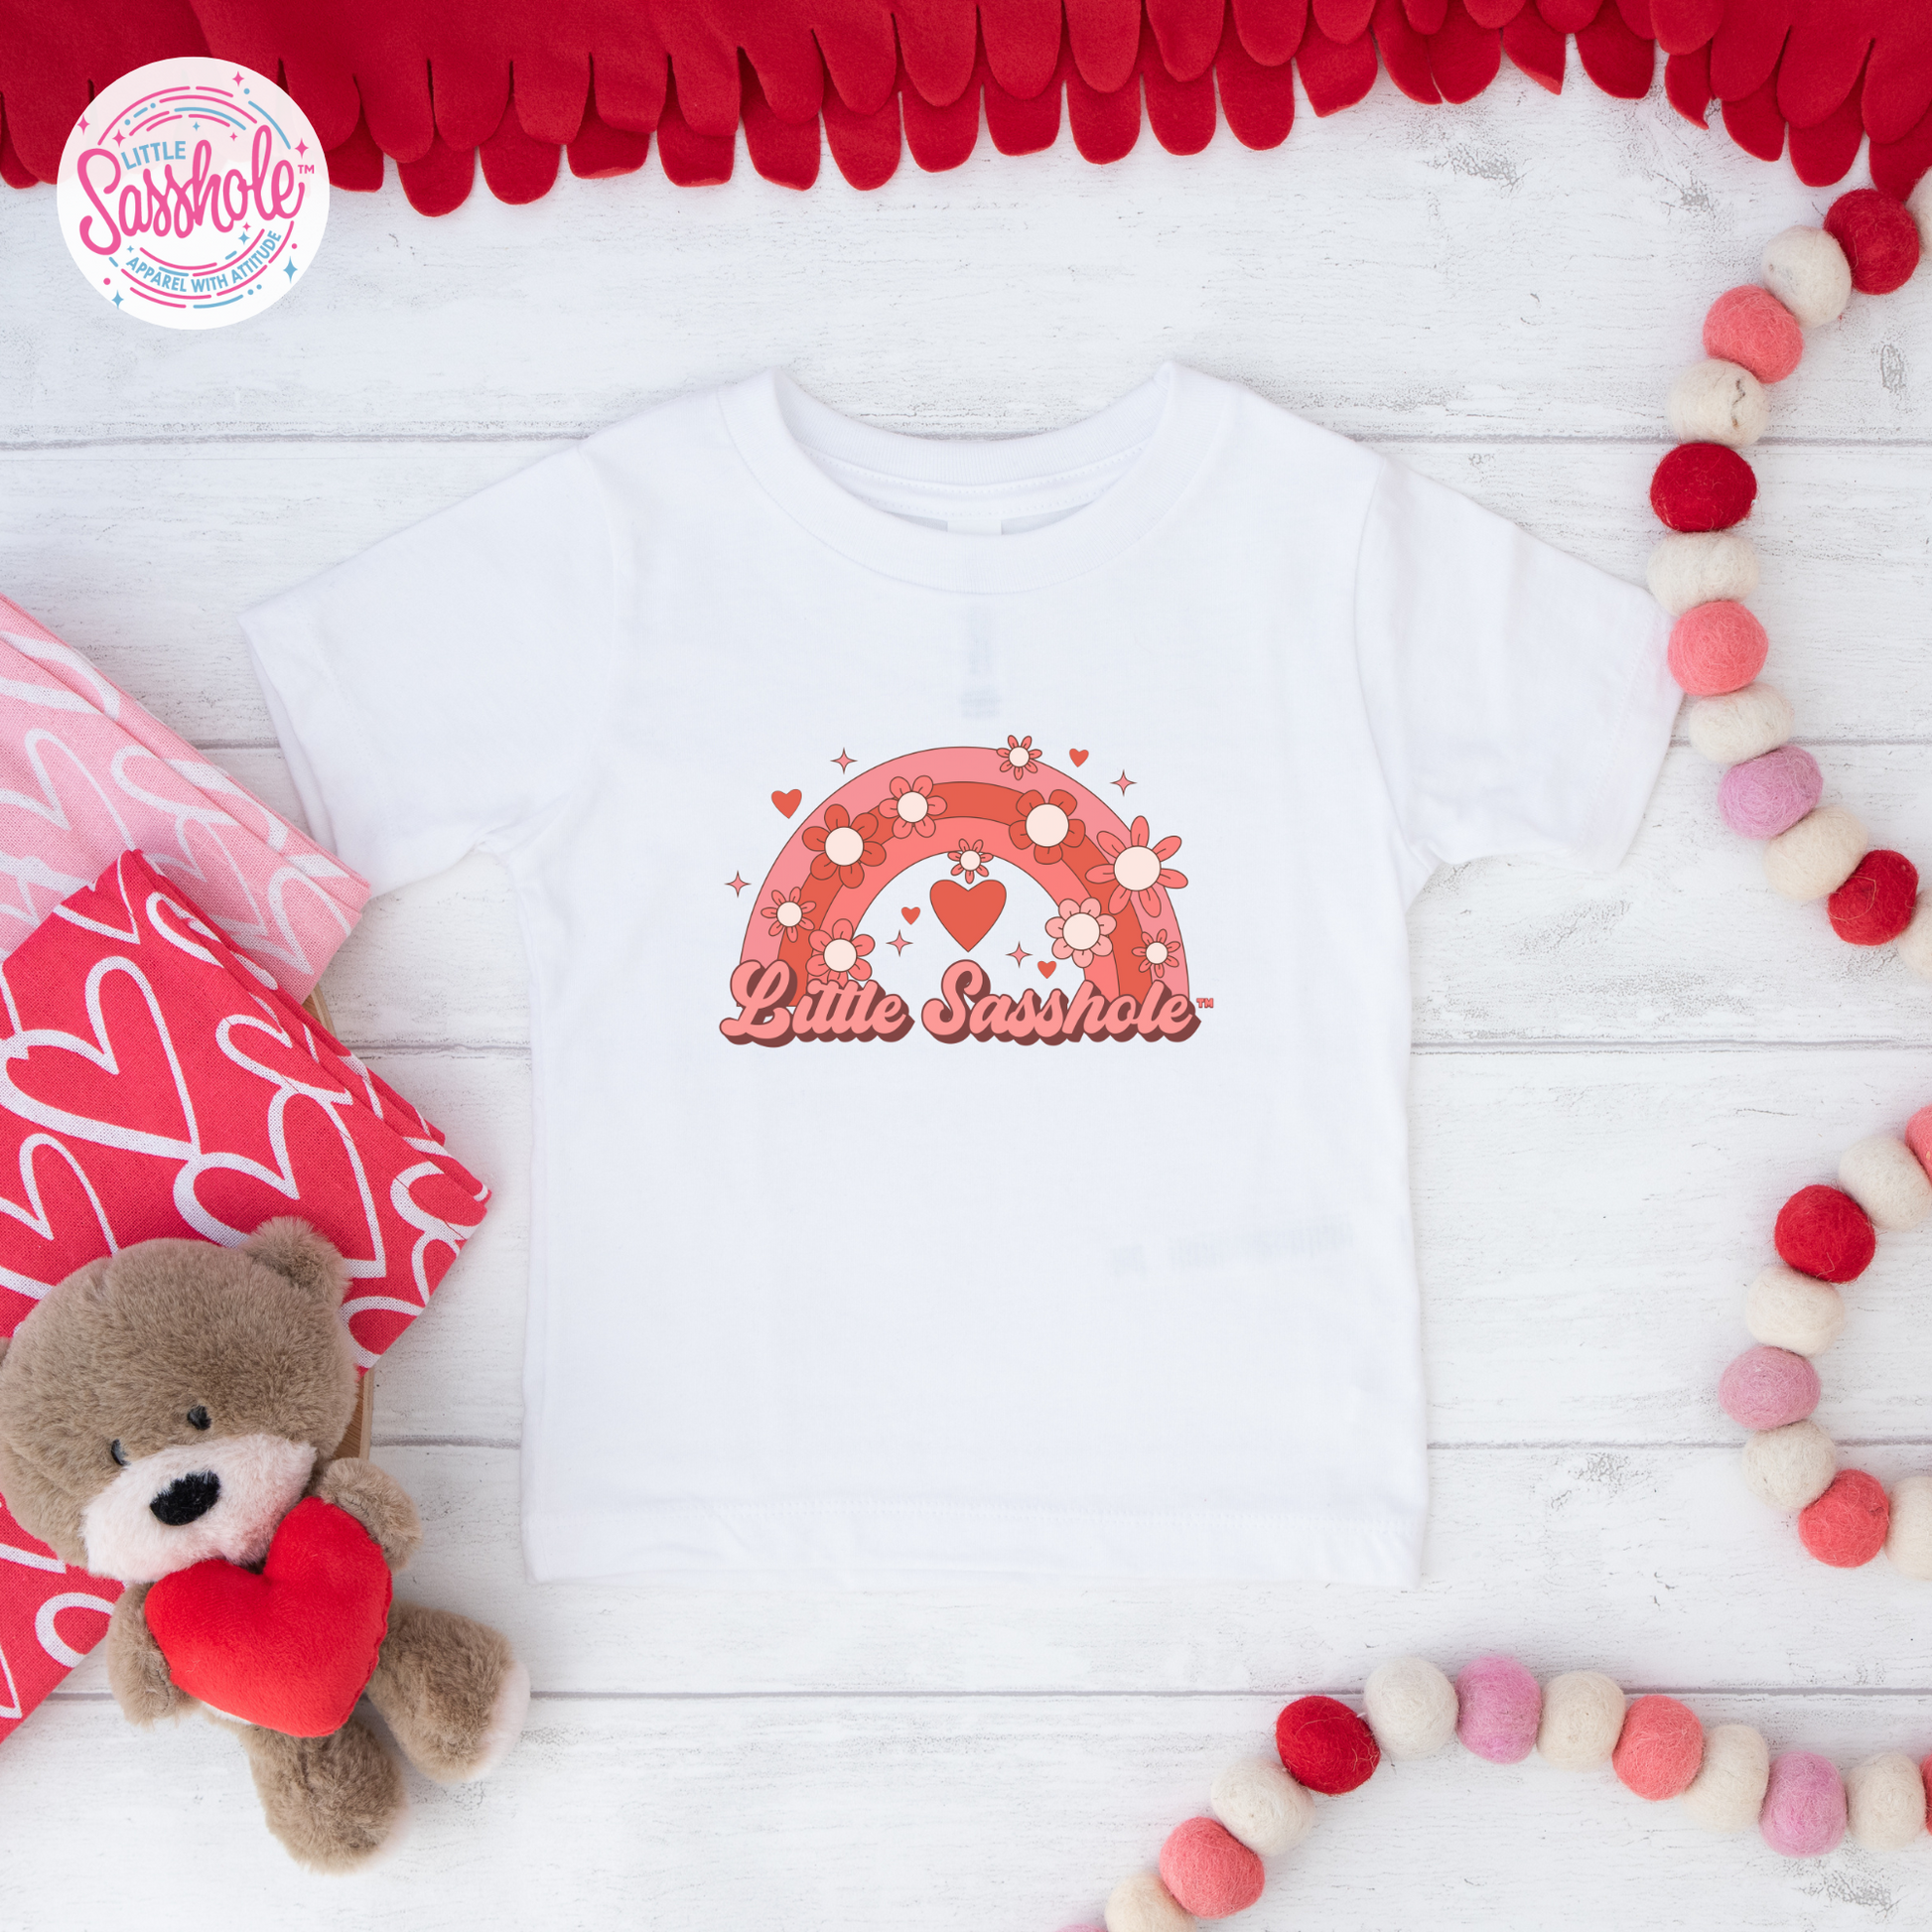 Valentine's wardrobe for toddlers, Valentine's fashion for little ones, Valentine's Day toddler style, Valentine's cuteness for toddlers, Valentine vibes toddler tee, Valentine toddler shirt, Valentine princess tee, Valentine joy for toddlers, Toddler girl's love-themed clothing, Toddler fashion for the love season, Toddler fashion for love season, Toddler cupid t-shirt, Toddler cupid in action tee, Toddler cupid fashion, T-shirts, Sweetheart toddler girl style, Sweetheart toddler girl apparel, 